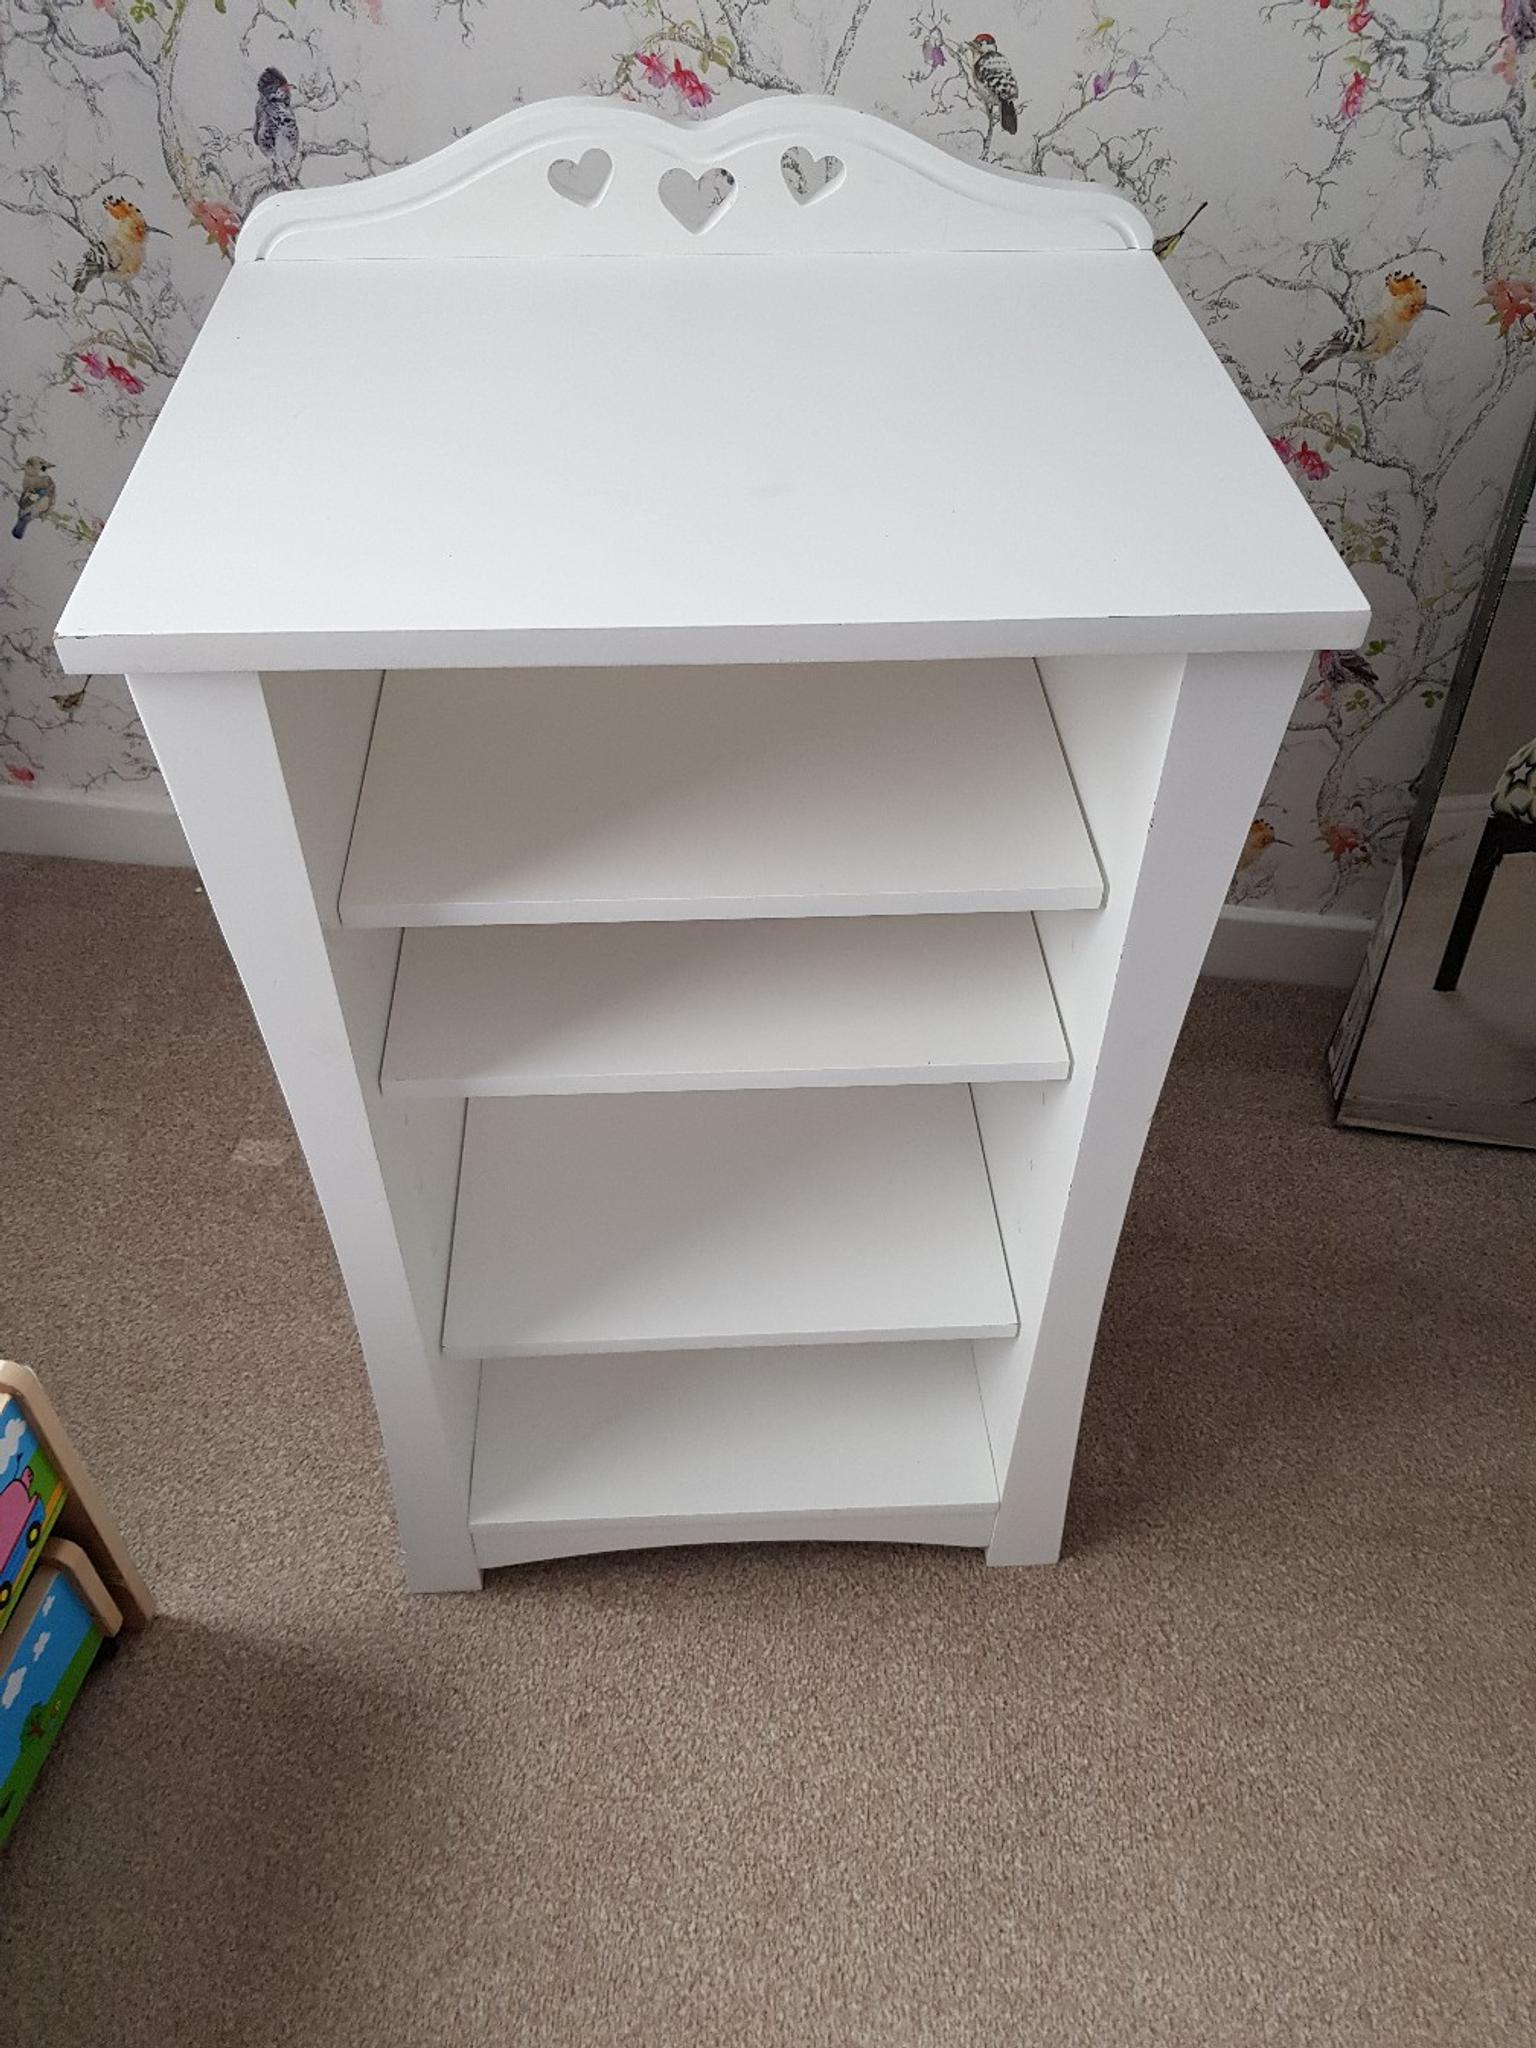 White Chest Of Drawers With Matching Bookcase In Eh23 Middleton